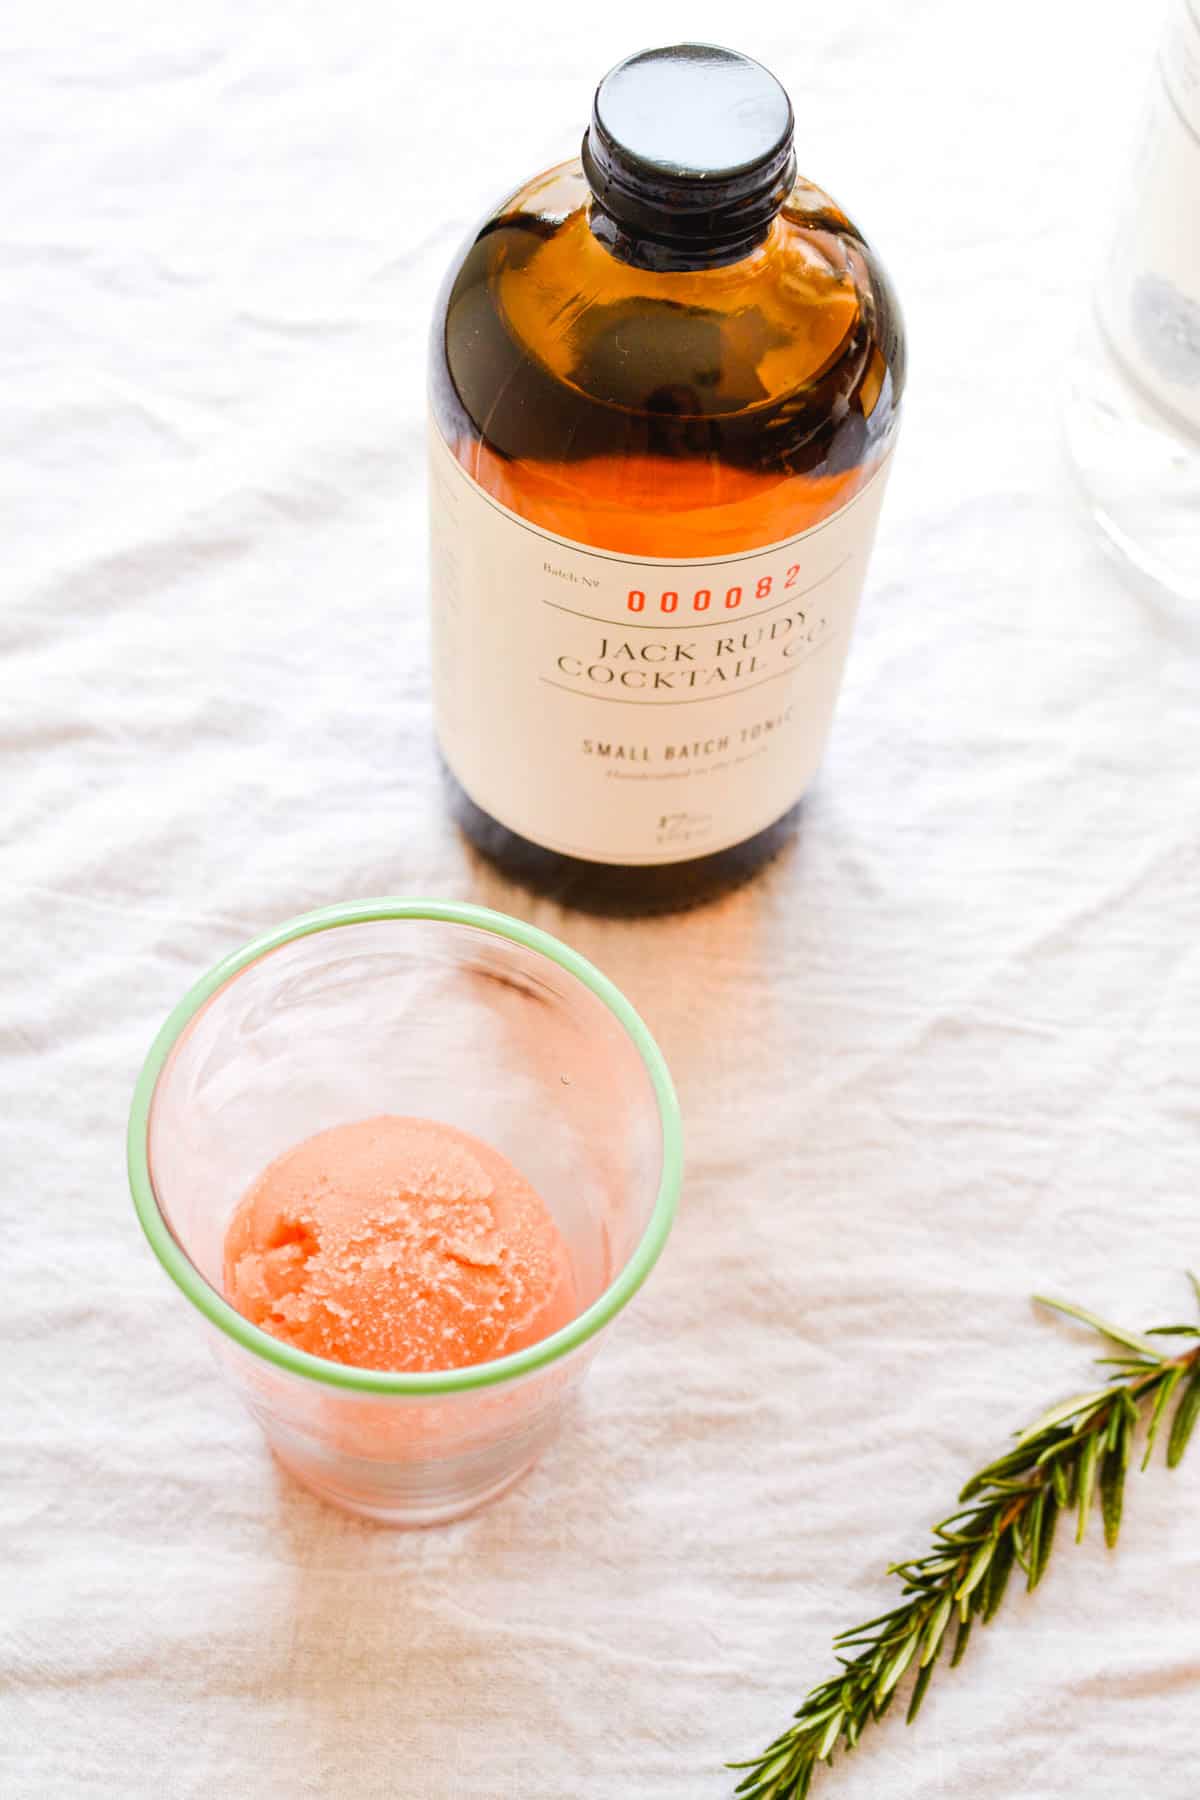 A cocktail cup holding blood orange sorbet next to a bottle of tonic.